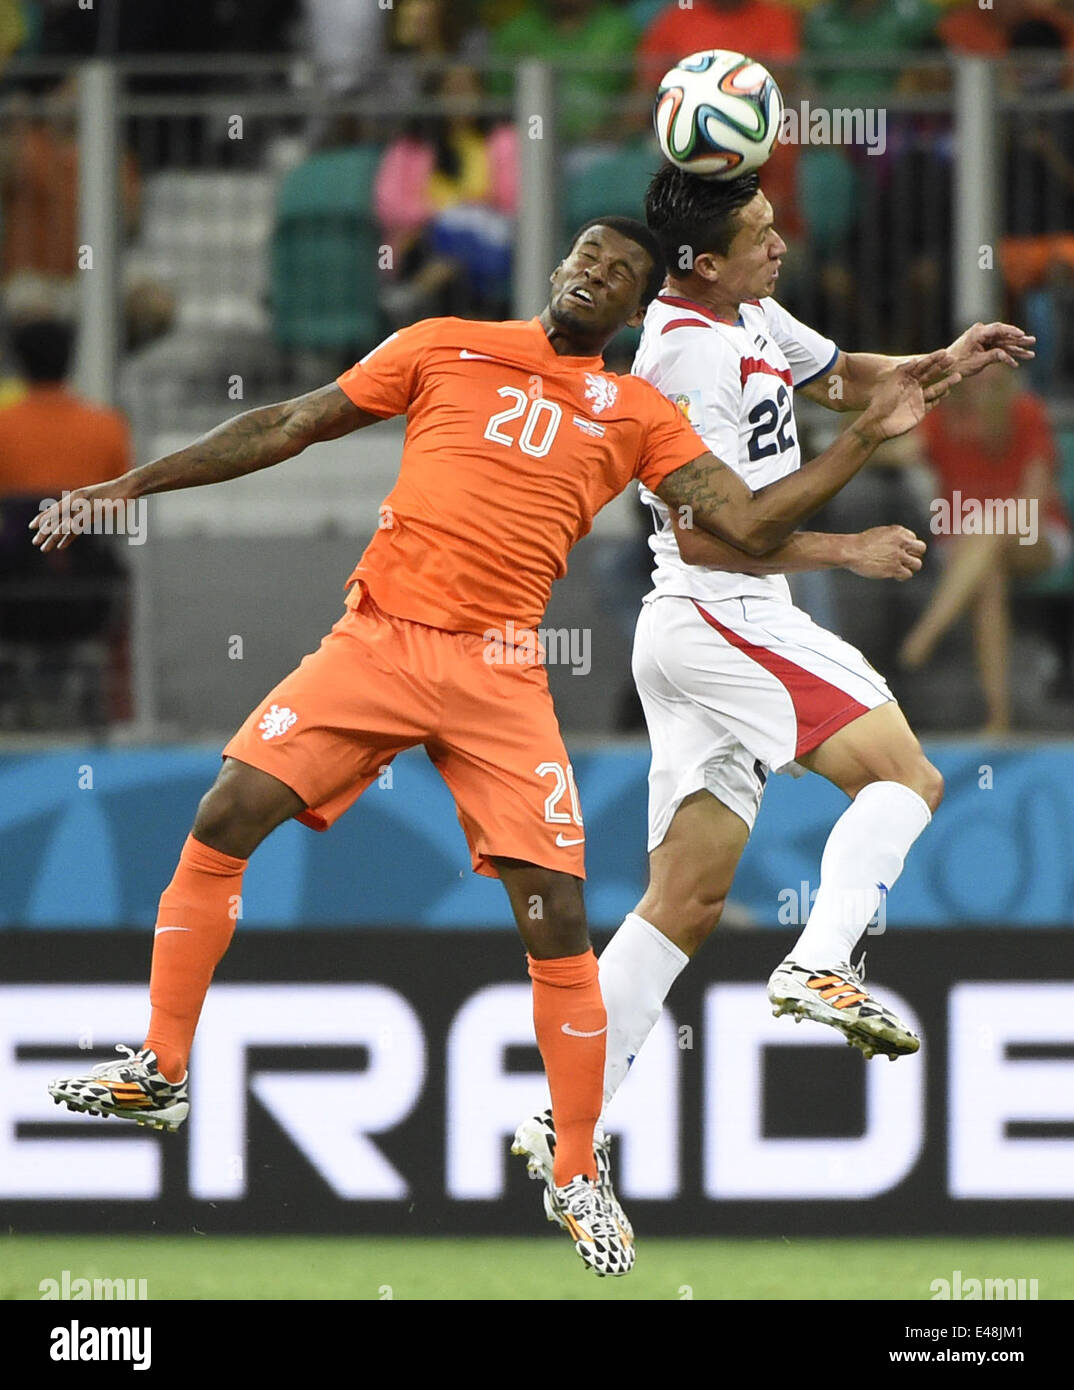 Salvador, Brazil. 5th July, 2014. Netherlands's Georginio Wijnaldum competes for a header with Costa Rica's Jose Miguel Cubero during a quarter-finals match between Netherlands and Costa Rica of 2014 FIFA World Cup at the Arena Fonte Nova Stadium in Salvador, Brazil, on July 5, 2014. Netherlands won 4-3 on penalties over Costa Rica after a 0-0 tie and qualified for semi-finals on Saturday. Credit:  Lui Siu Wai/Xinhua/Alamy Live News Stock Photo